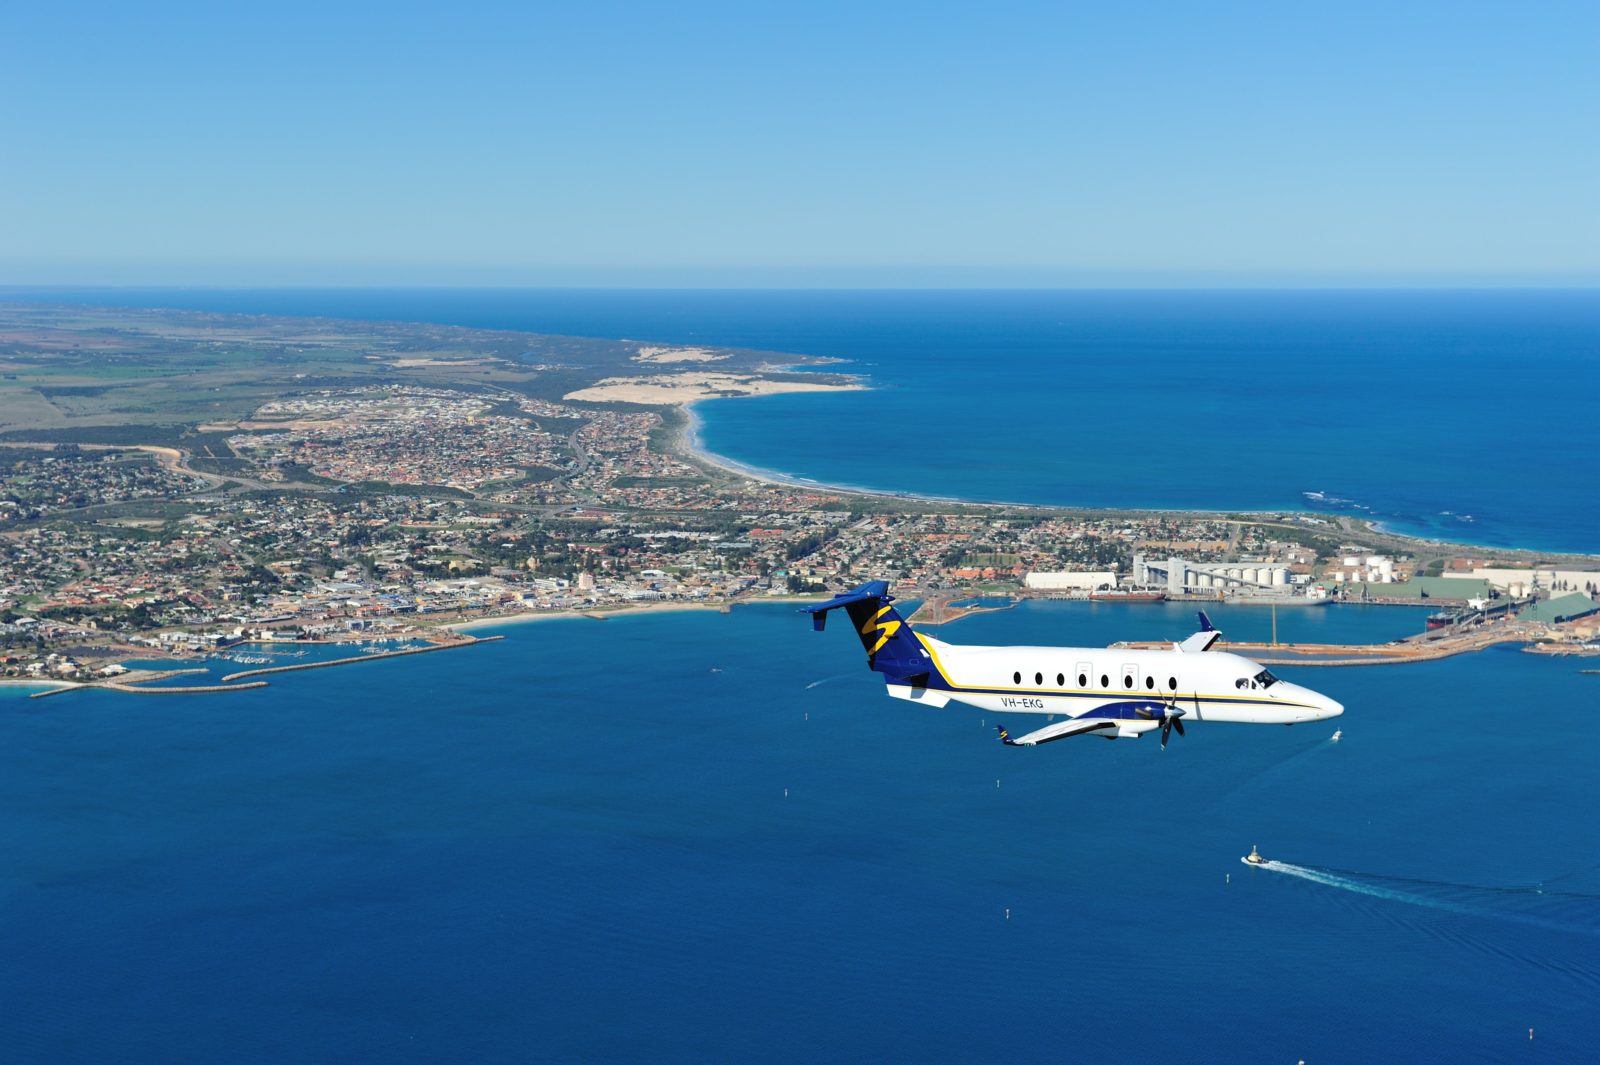 The Tour flights range from a 30 minute Town Buzz to a Full Day Fly and Flipper tour to the Abrolhos